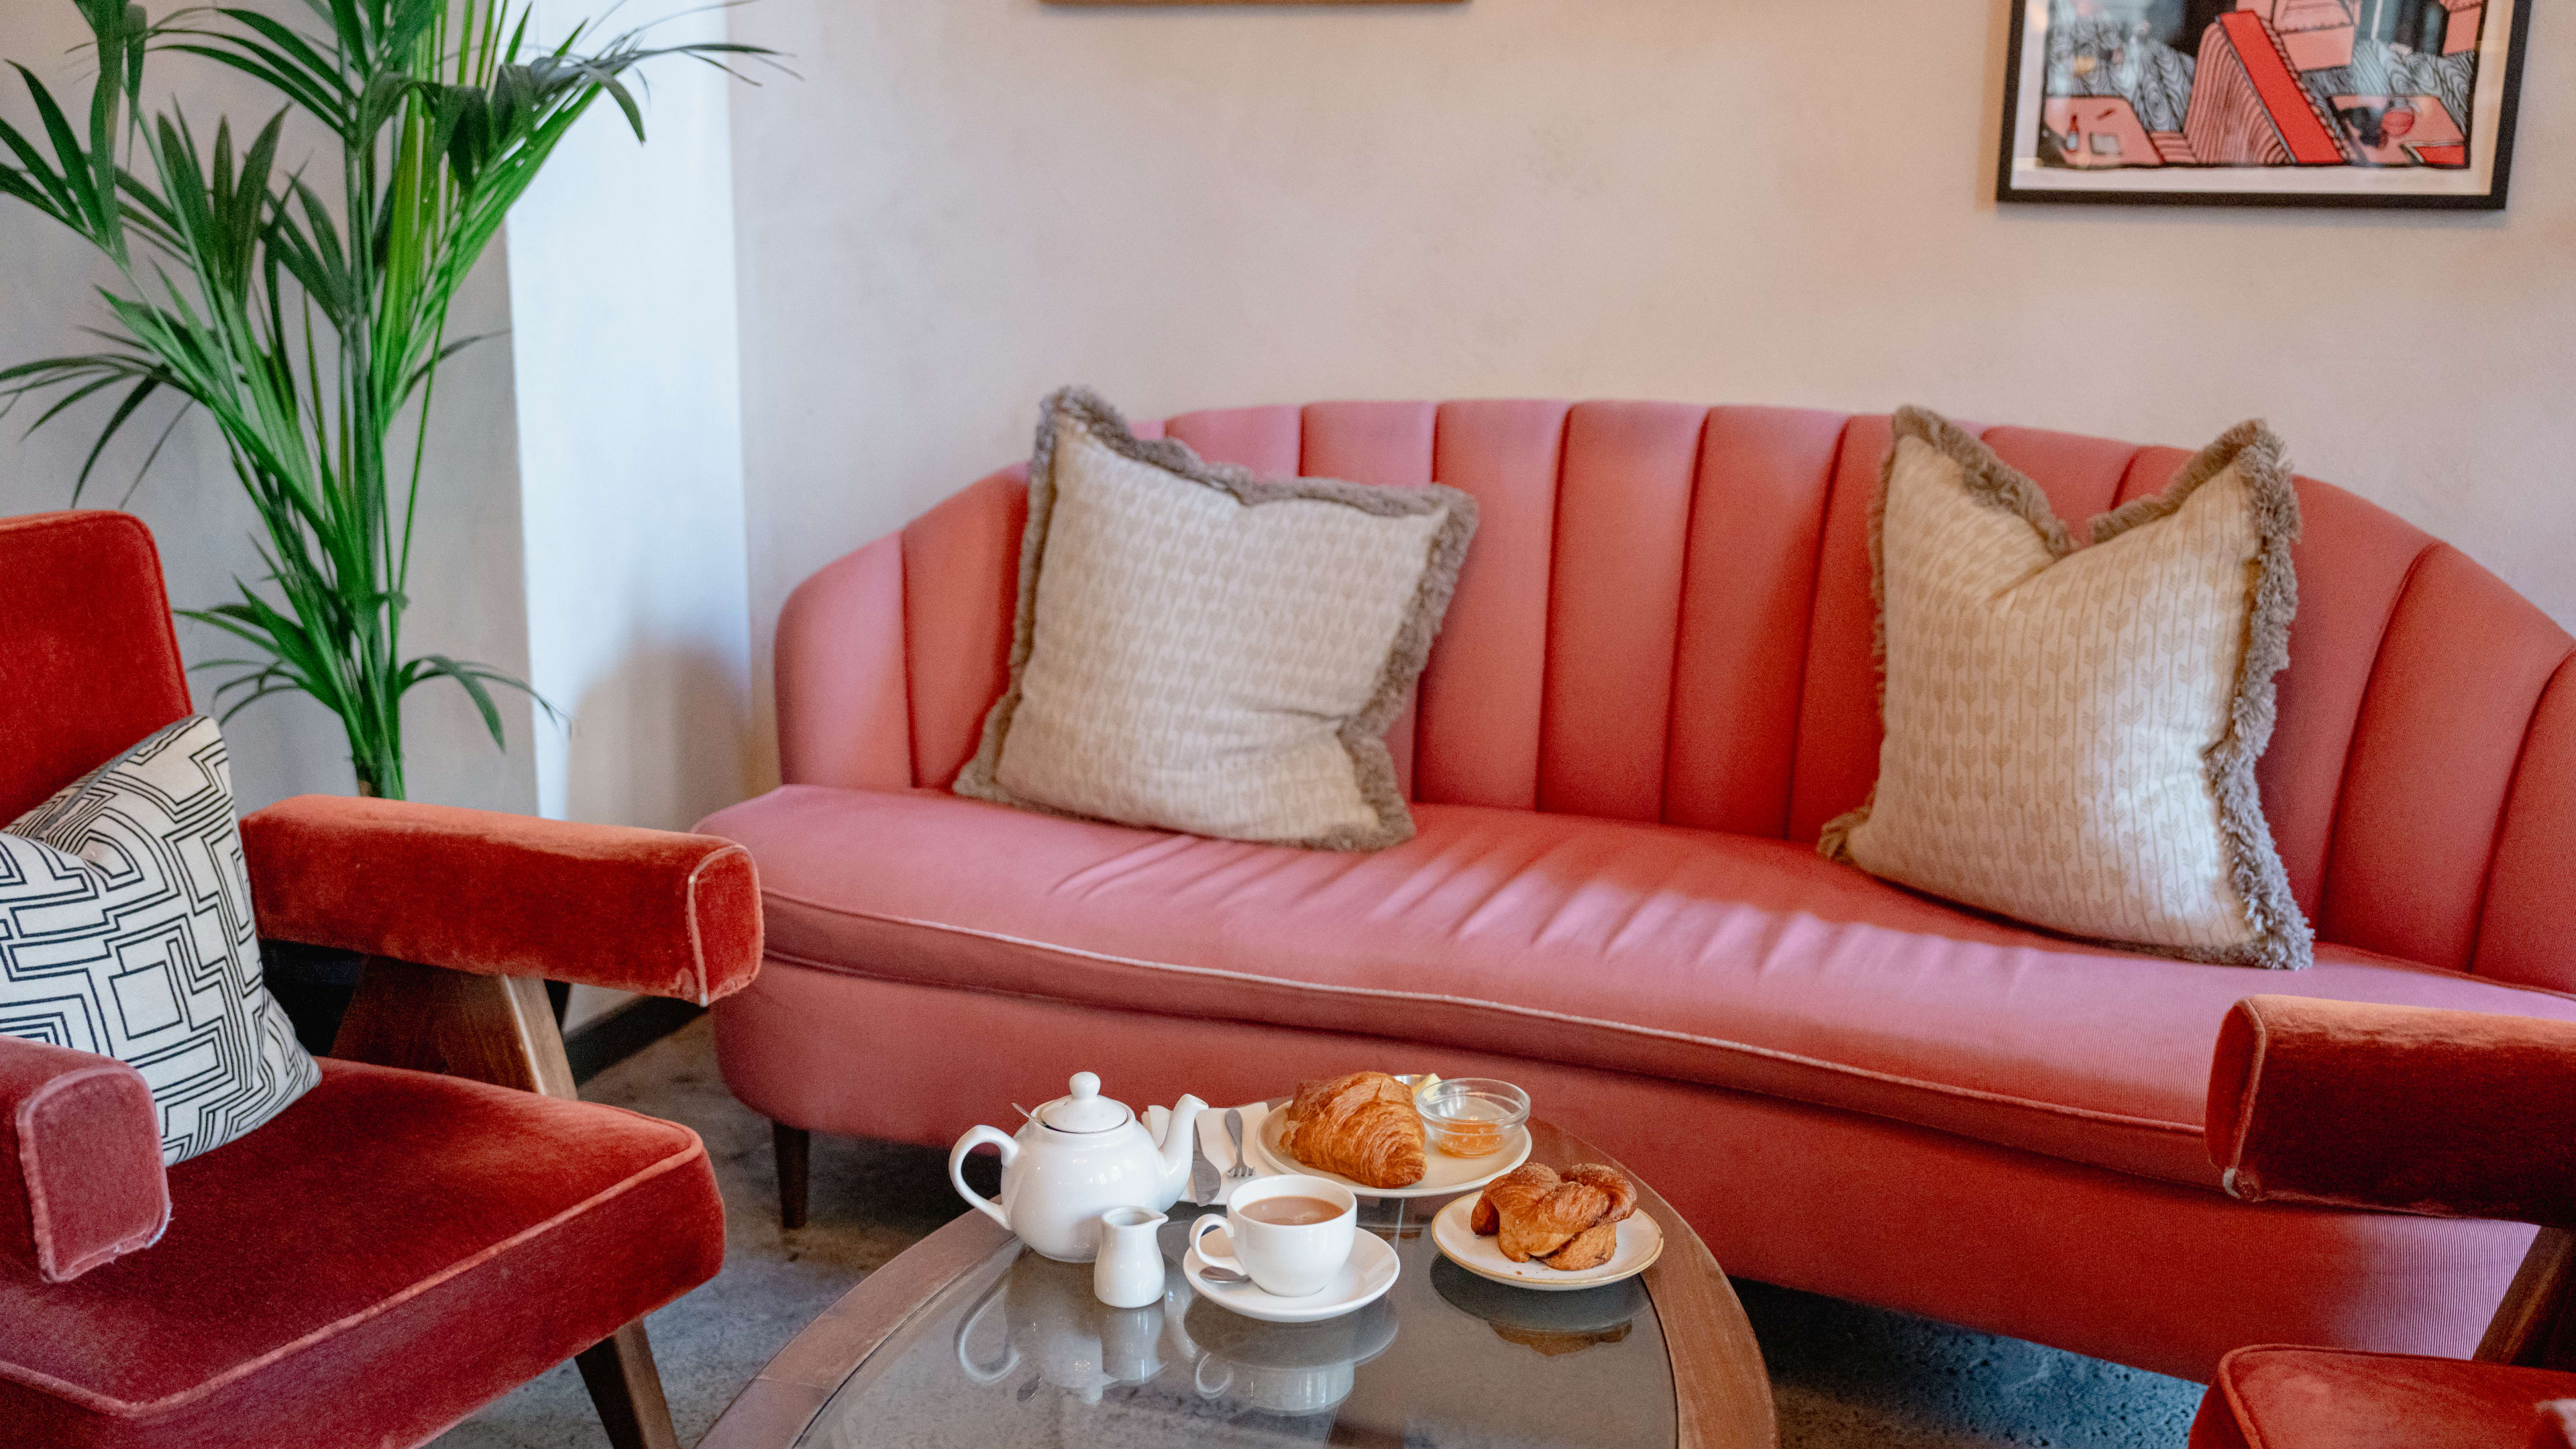 A pink velvet couch with beige patterned pillows. Two pink velvet chairs flank a glass coffee table with a teapot, cup of tea, and a few pastries.